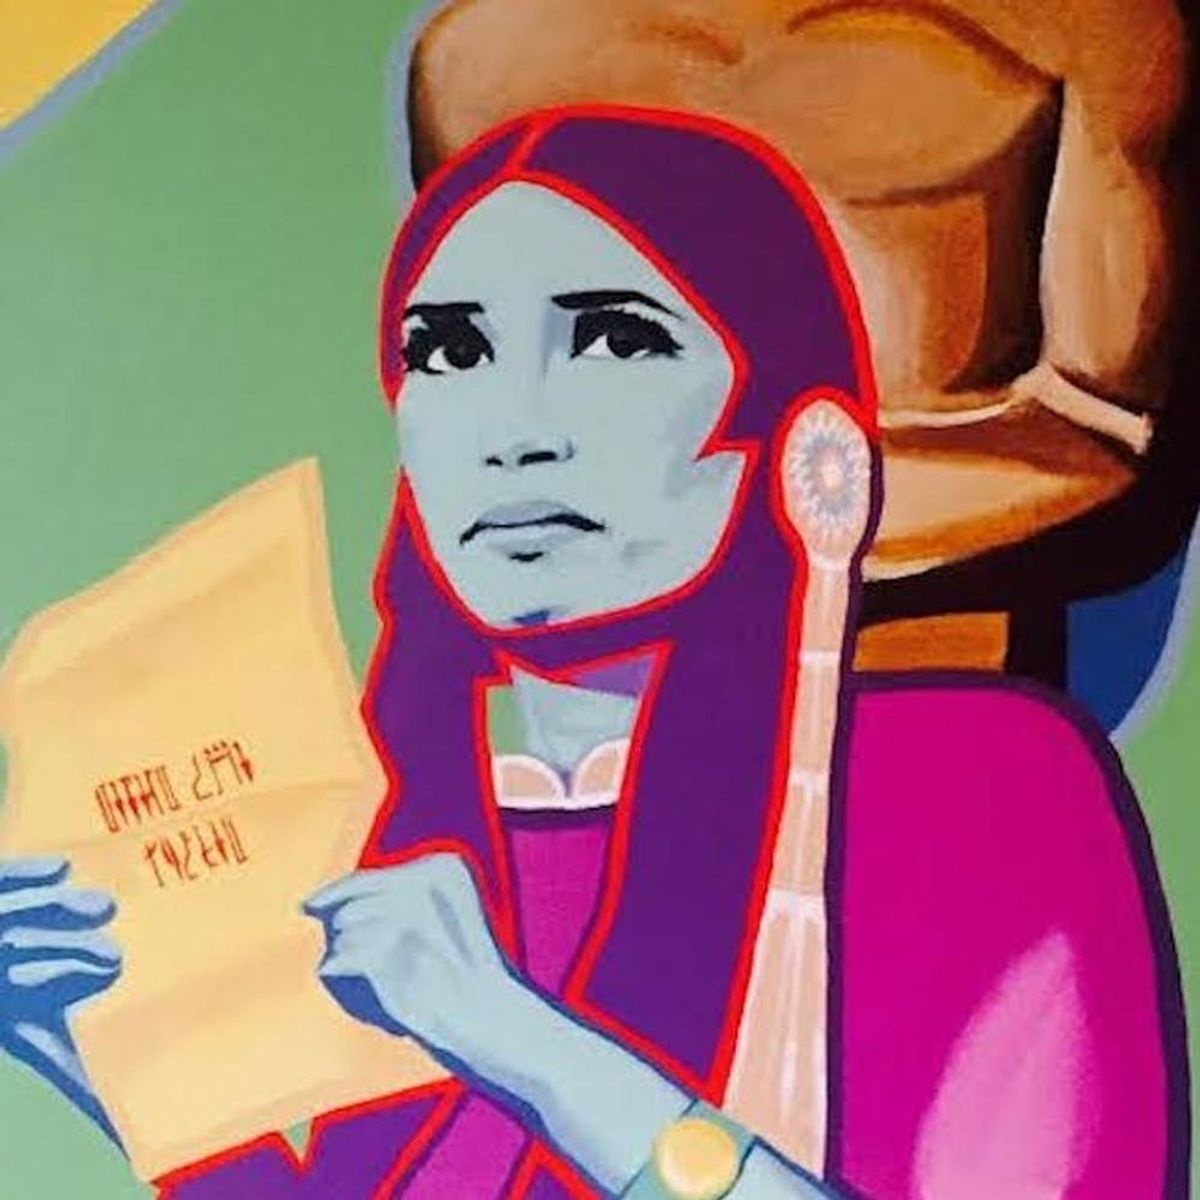 12 Political Art Pieces to Help You Channel Your Feelings RN